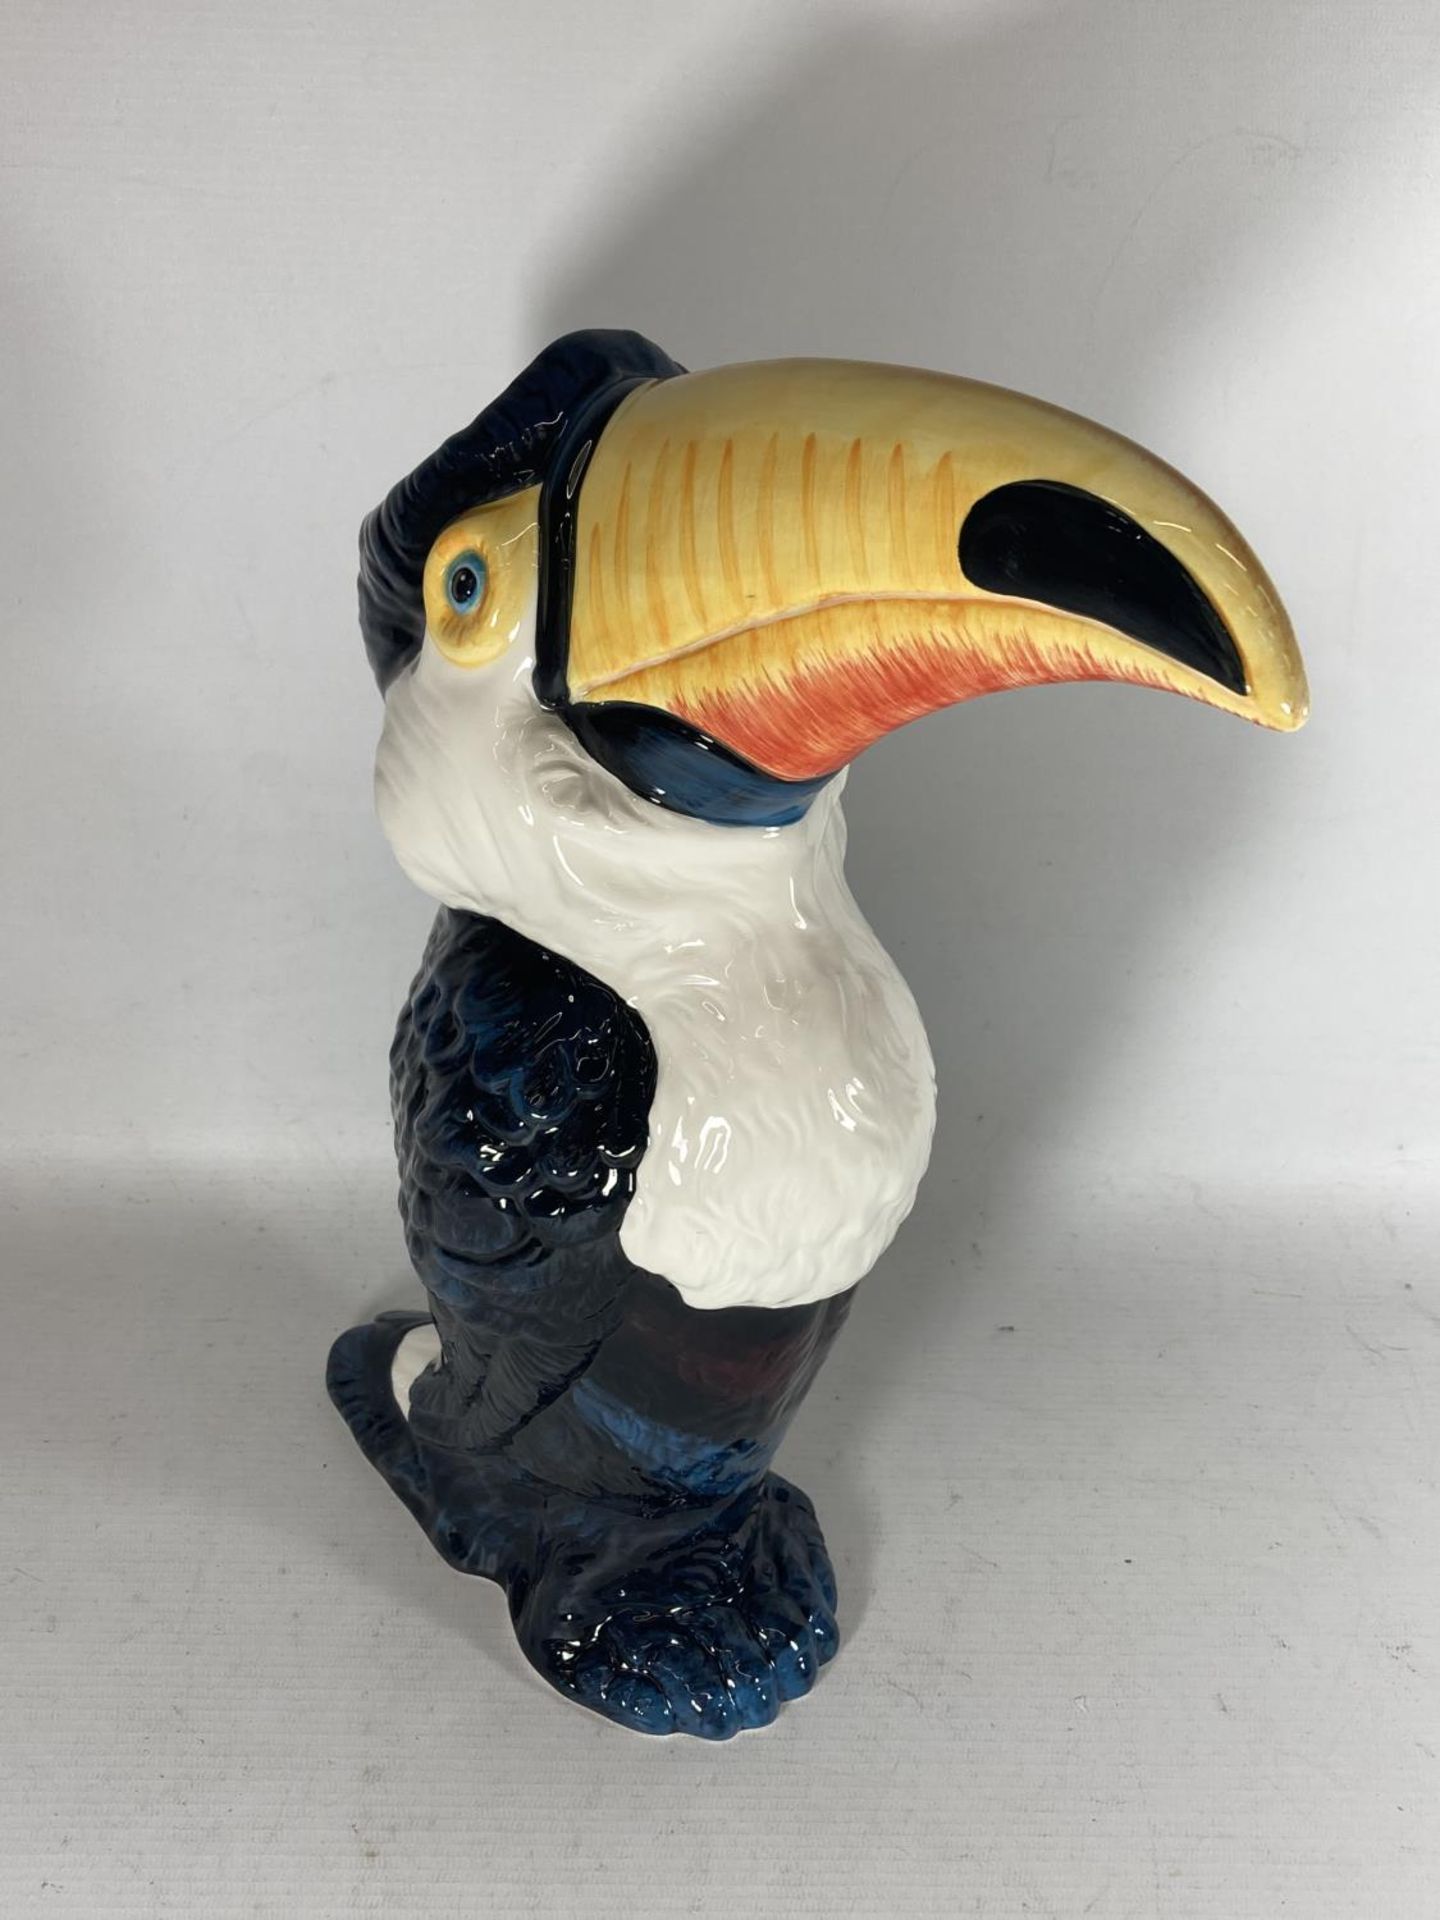 A VERY LARGE CERAMIC TOUCAN - Image 2 of 3